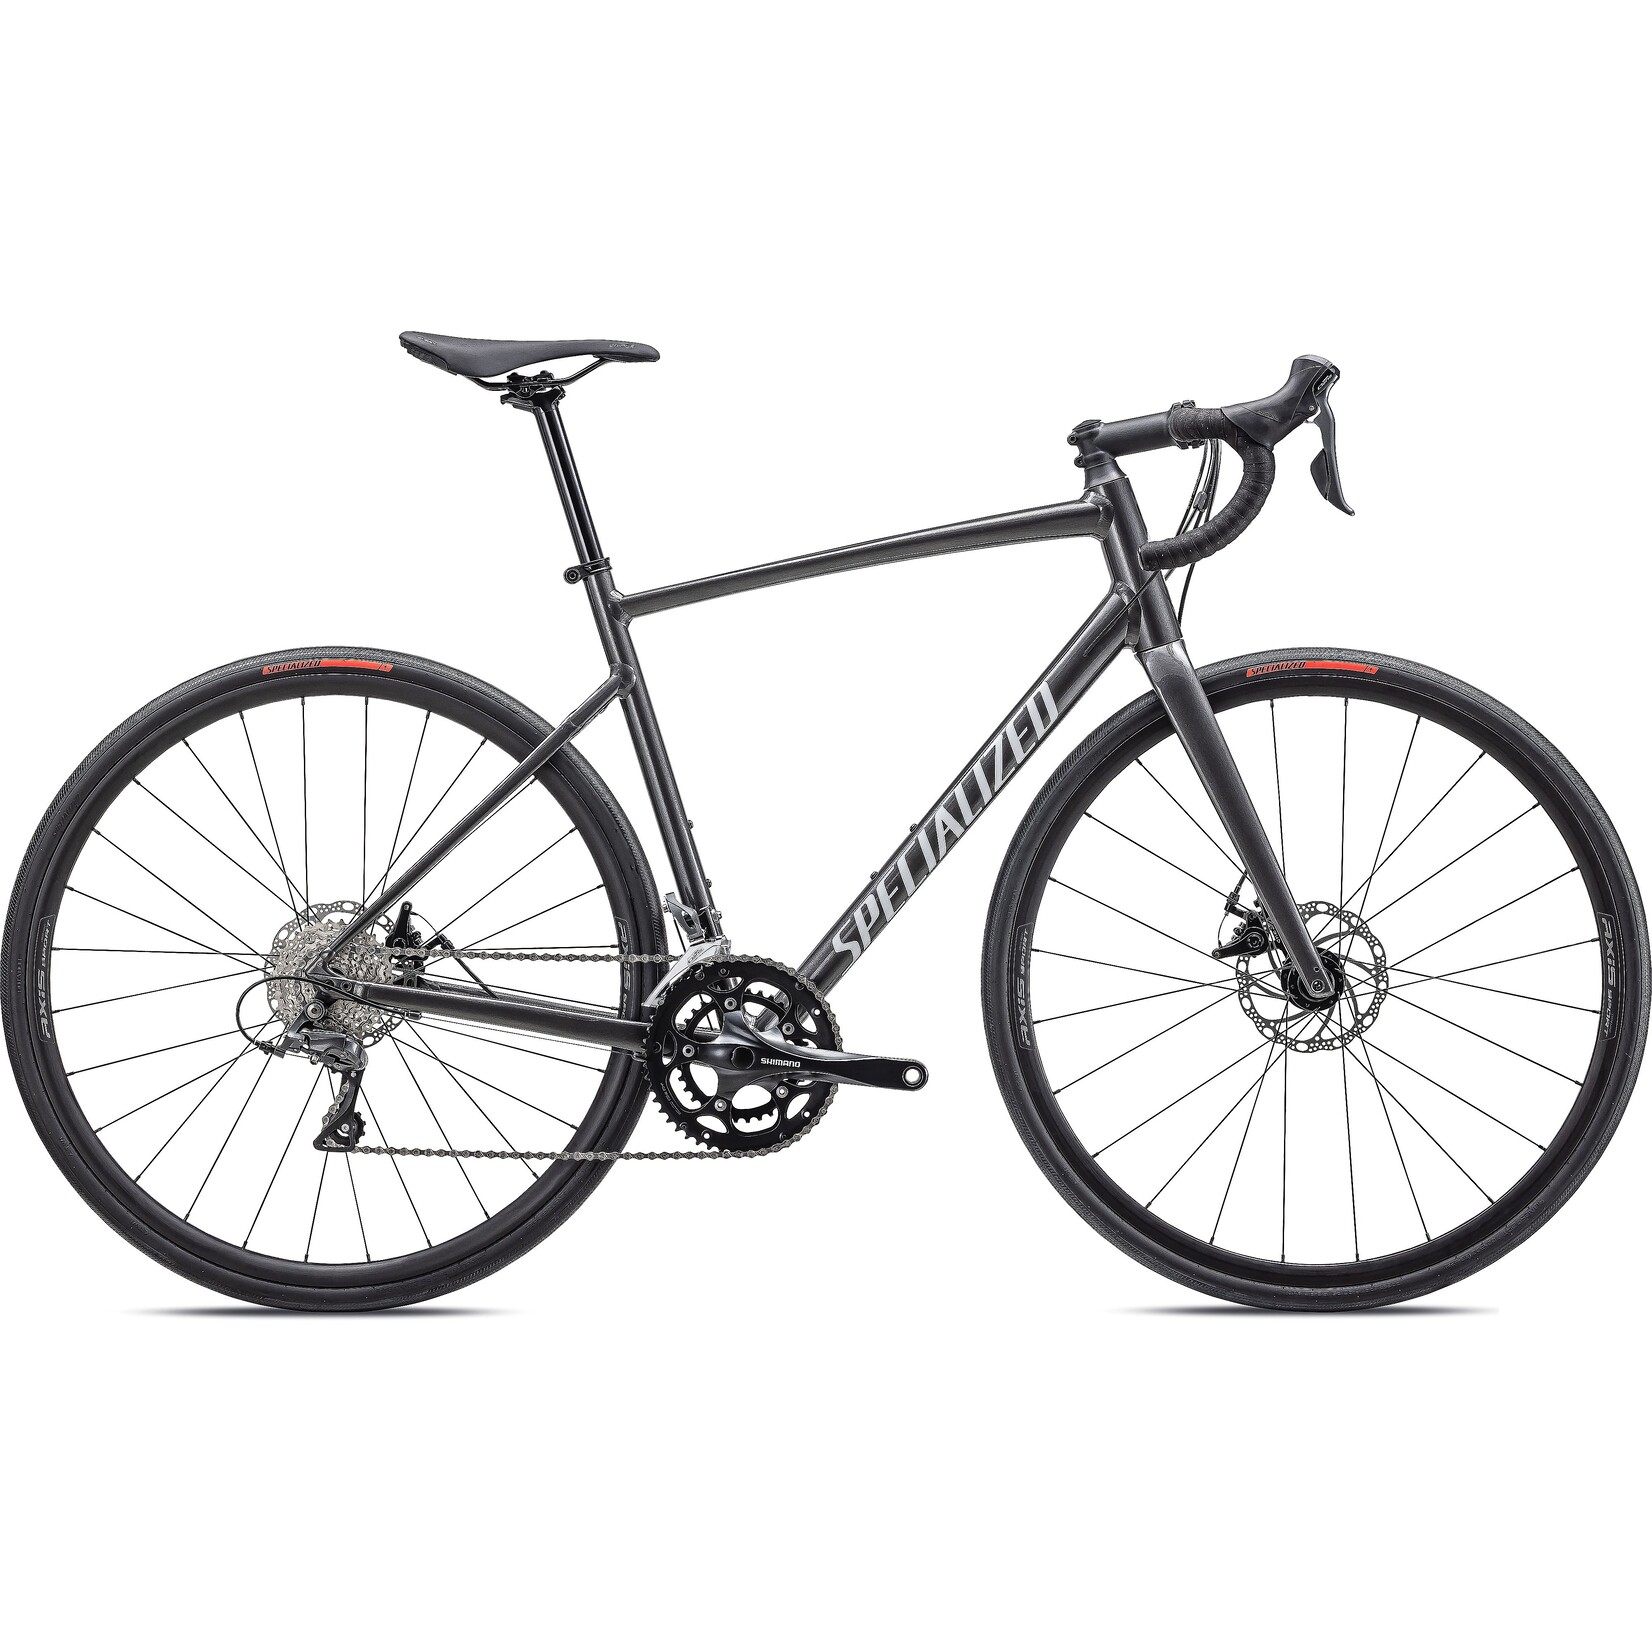 Specialized Allez in Gloss Smoke/White/Silver Dust